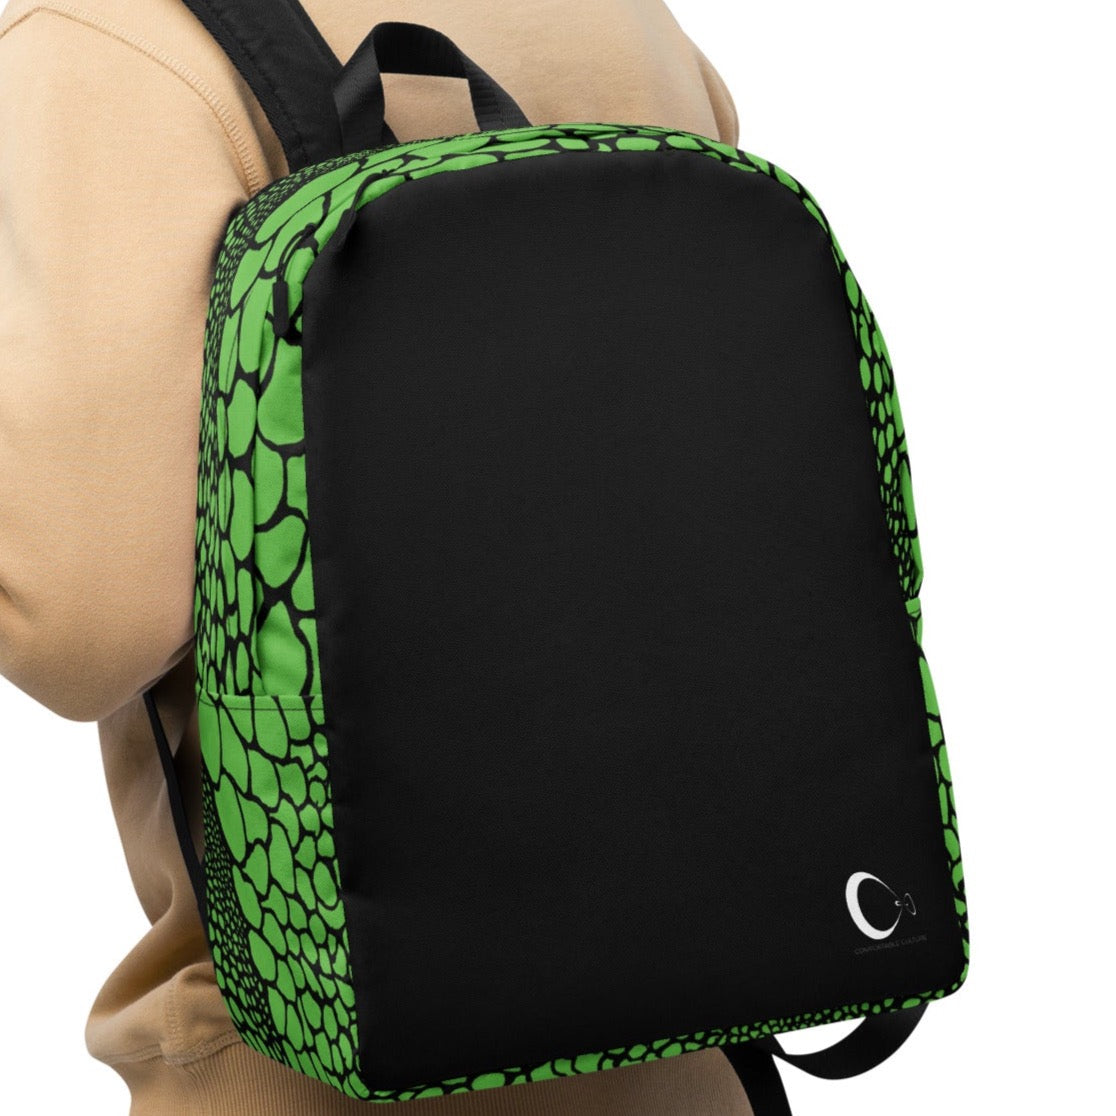 Wild Green Organic Print Backpack | Modern & Minimalist Water-Resistant Laptop Backpack with Hidden Pocket | - Comfortable Culture - Backpacks - Comfortable Culture